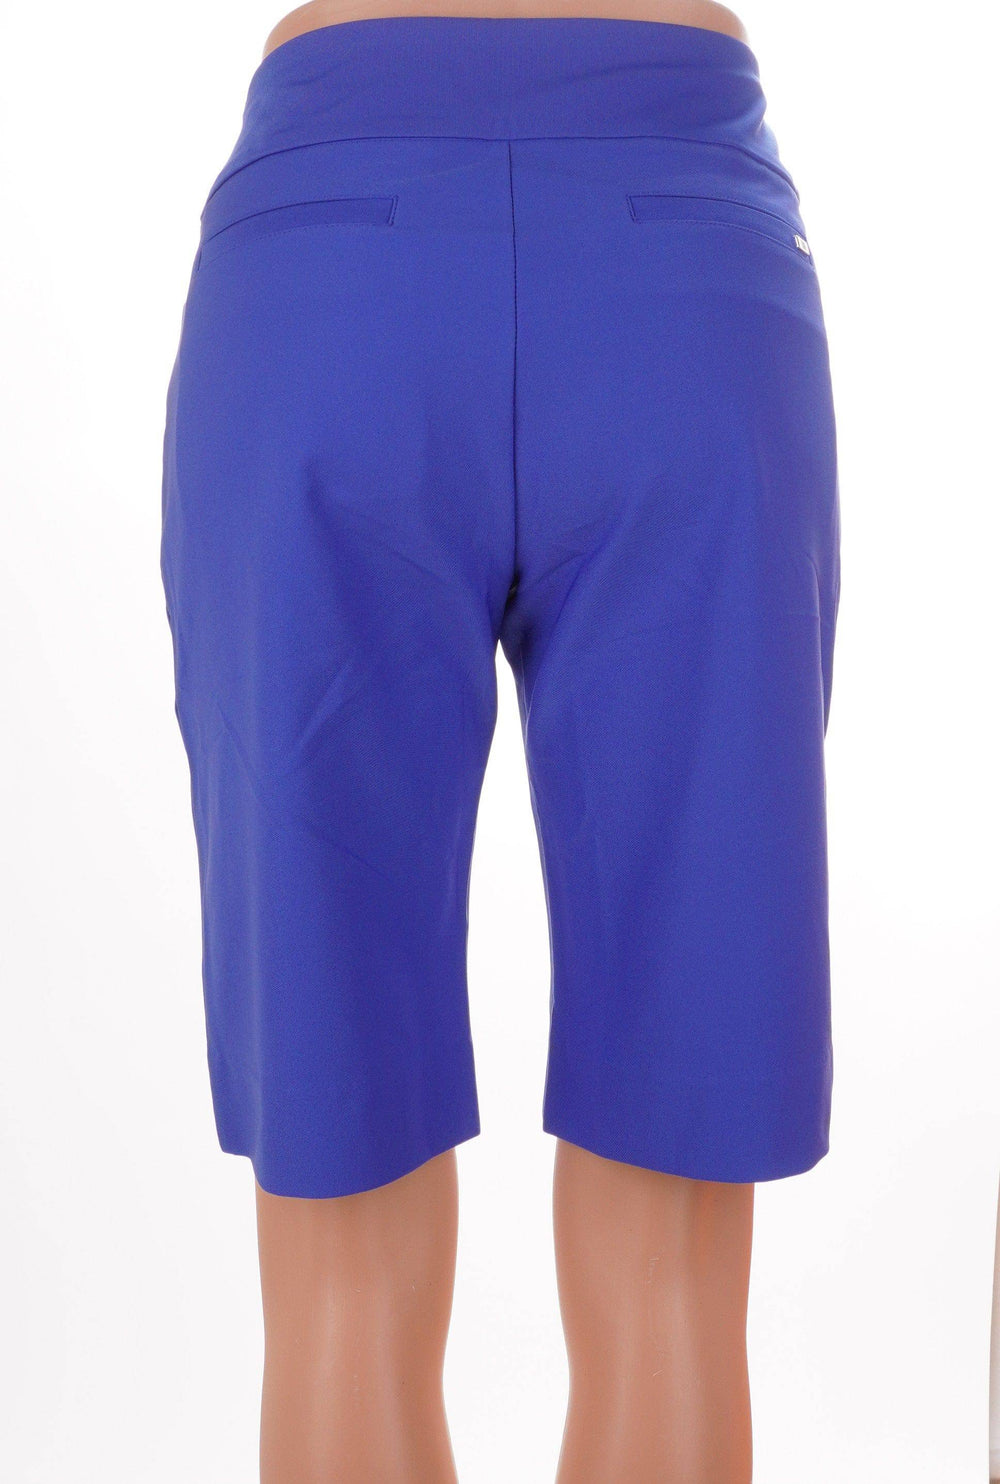 Tail Blue / 6 / Exclusive New Product Tail Short - Mystic Blue - Size 6